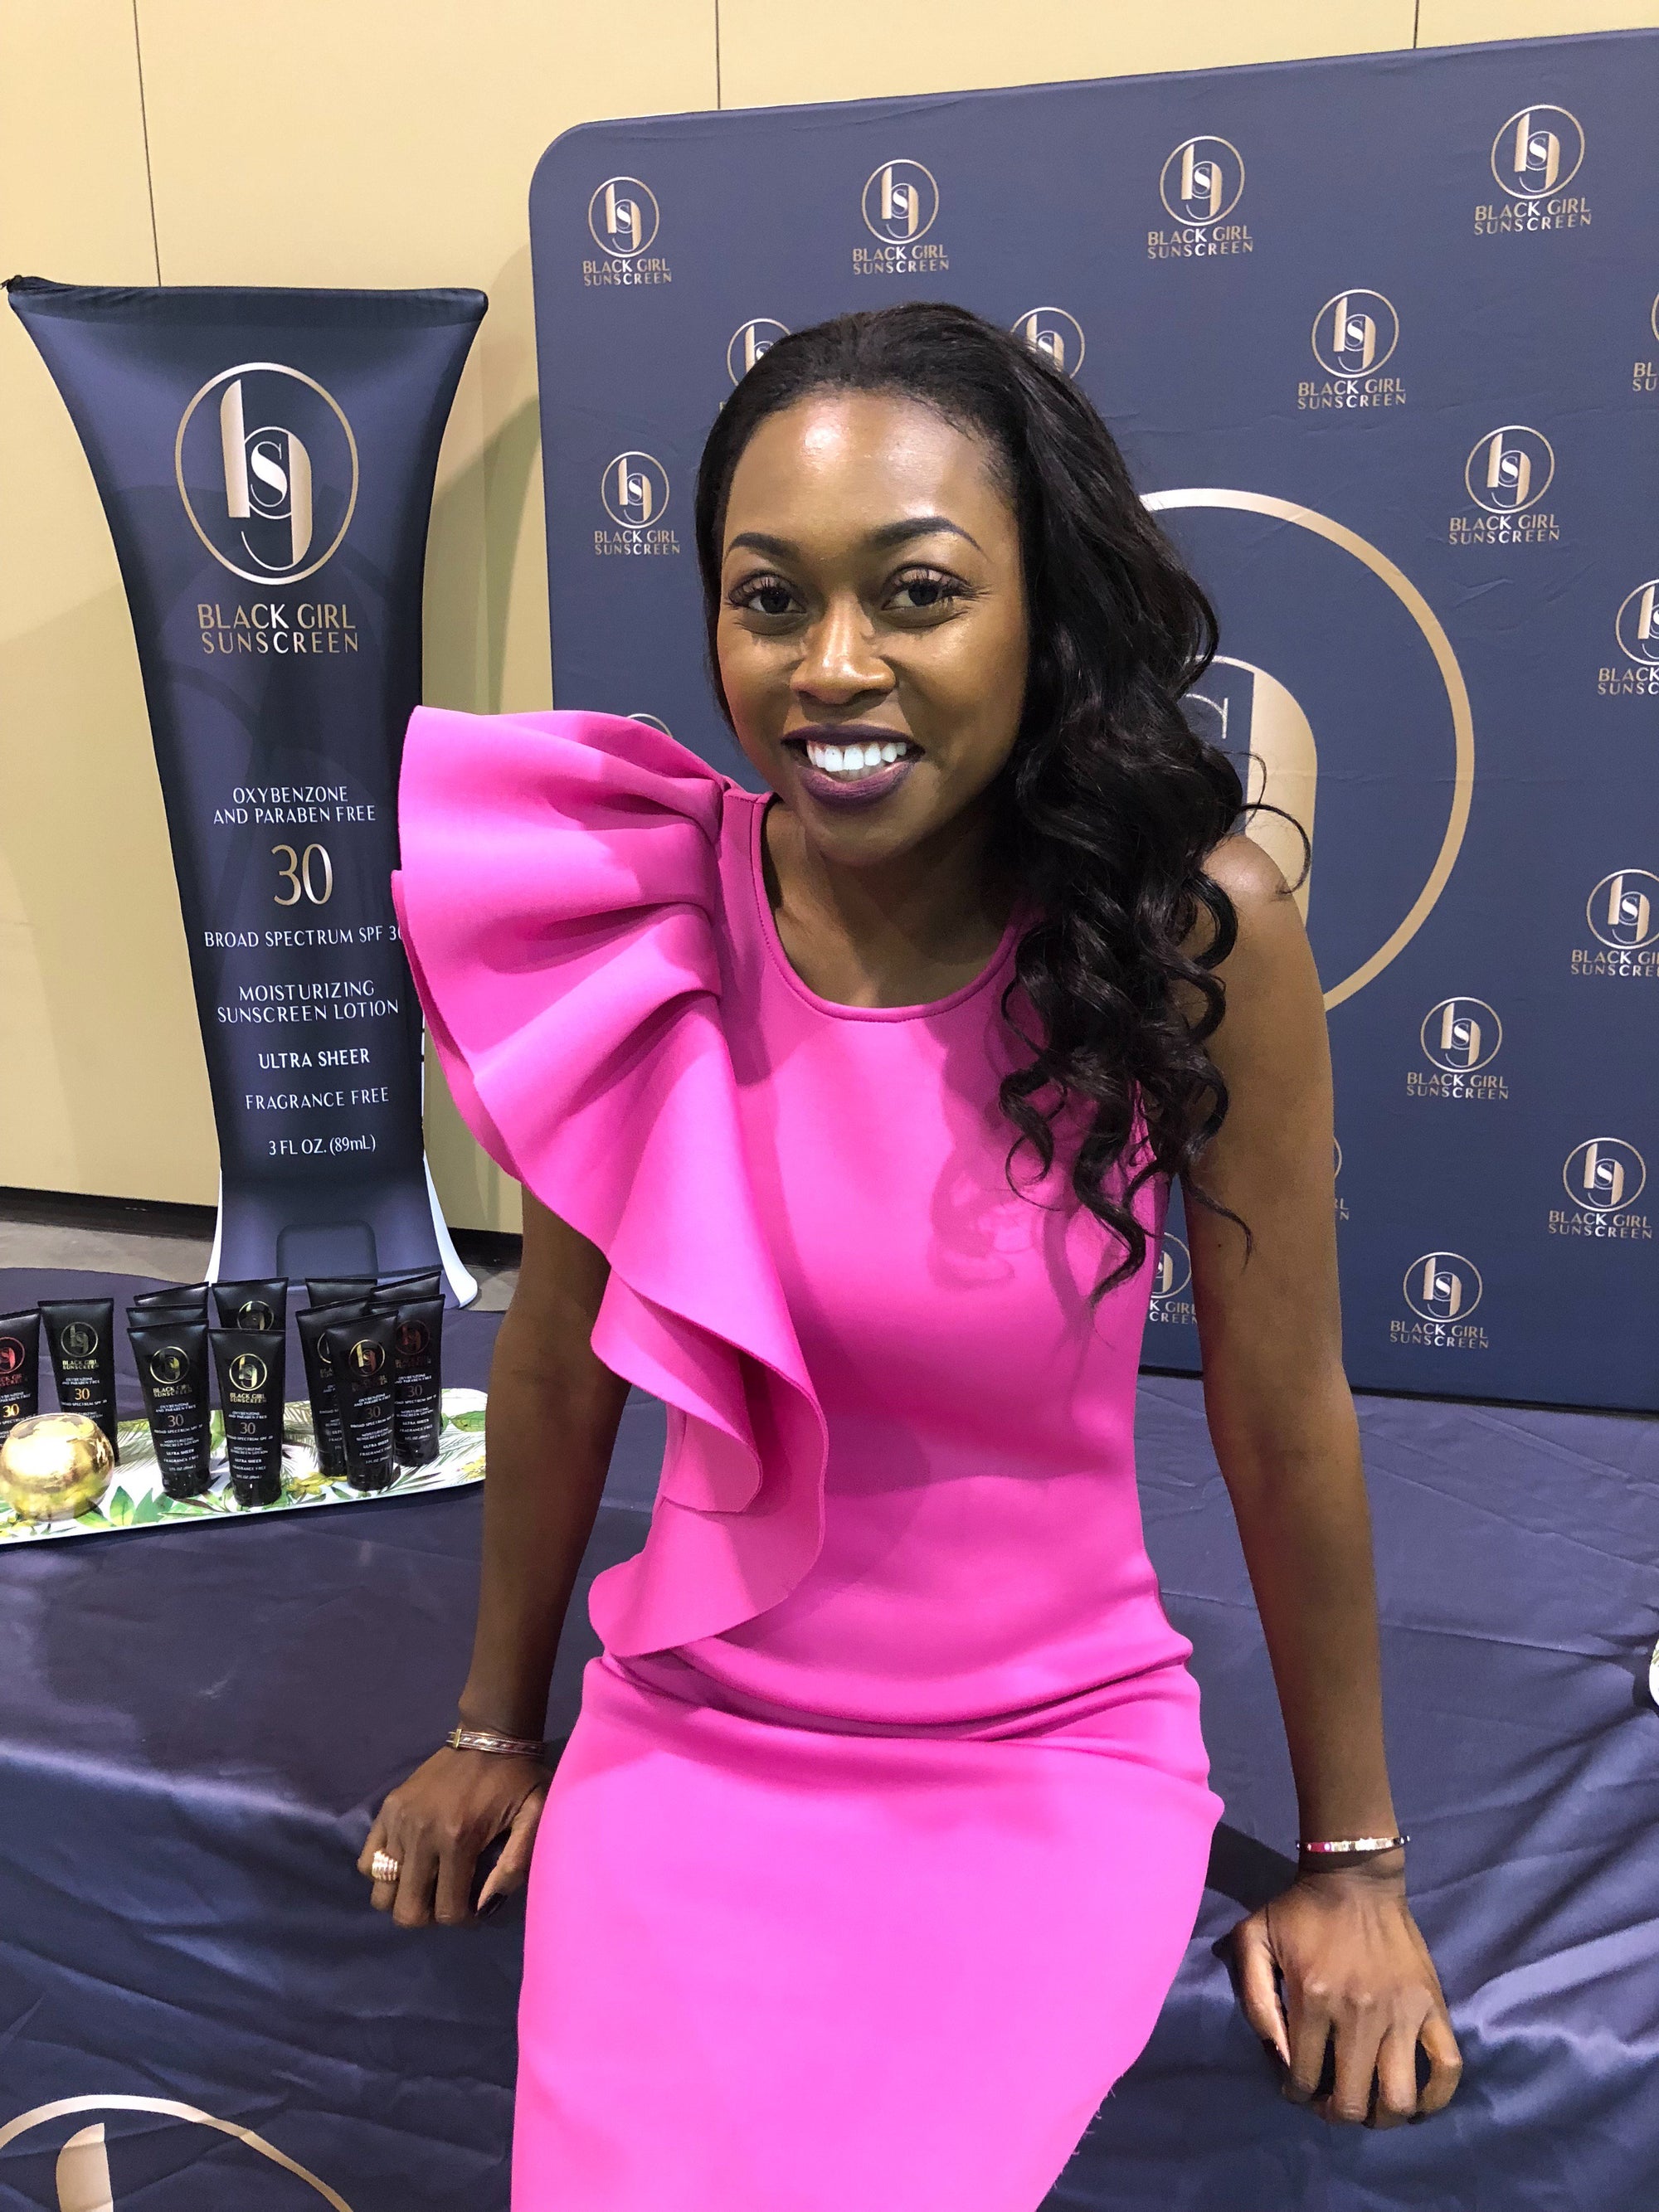 Shontay is wearing a flamboyant, hot pink dress. Her hair is thrown to her right shoulder stylishly. She is smiling confidently and gives off a profession air. 